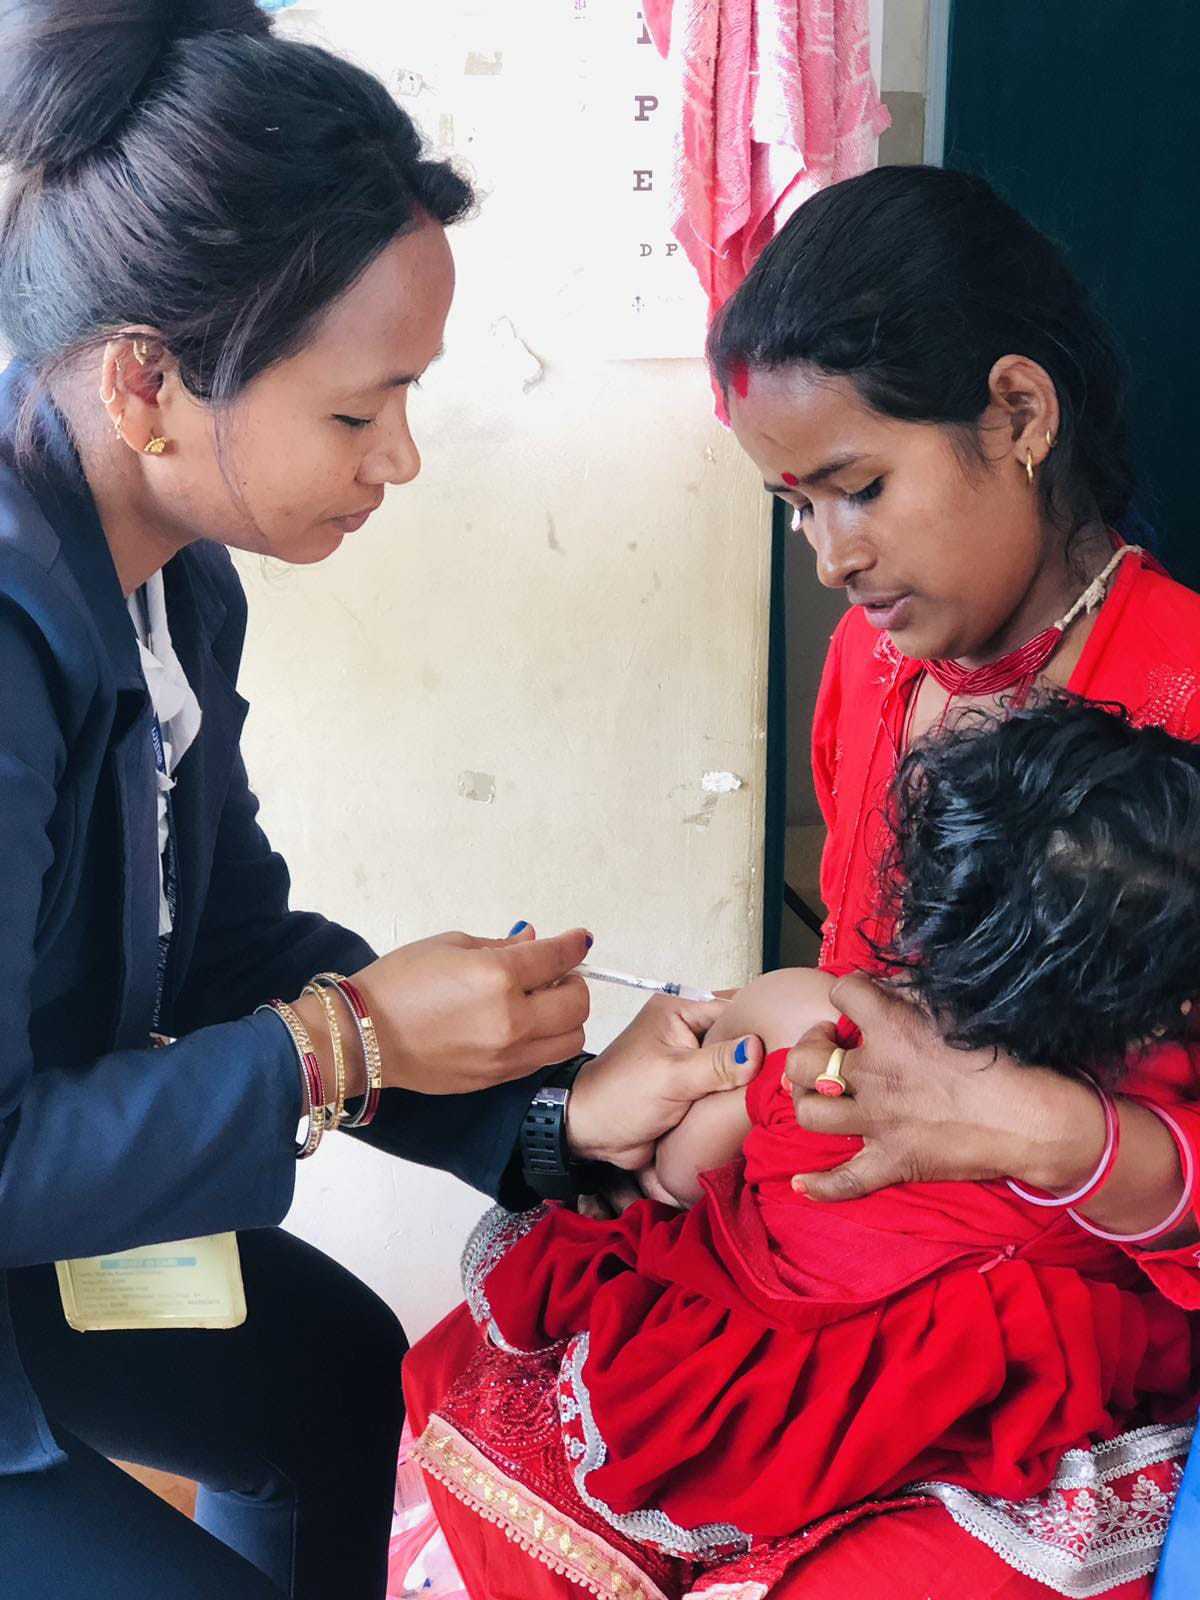 A health worker from Dhola Health Post in Jwalamukhi Rural Municipality, Dhading, administering vaccinations to children. Credit: Chhatra Karki